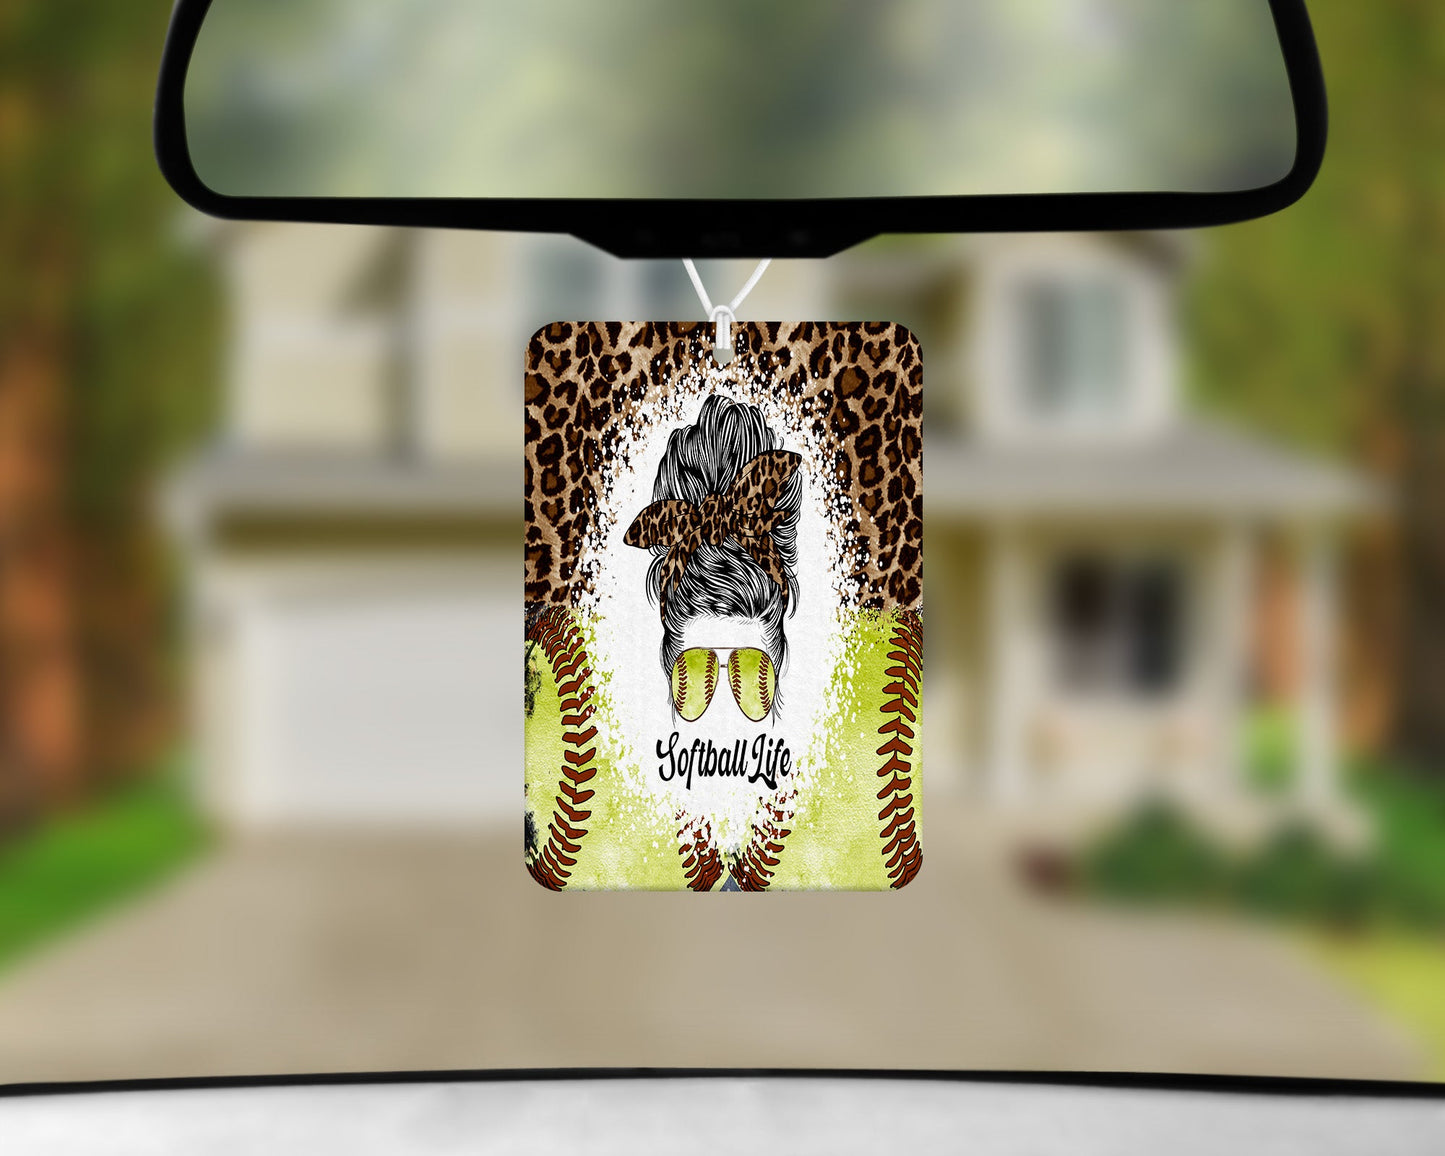 Softball Life Leopard Print|Freshie|Includes Scent Bottle - Vehicle Air Freshener